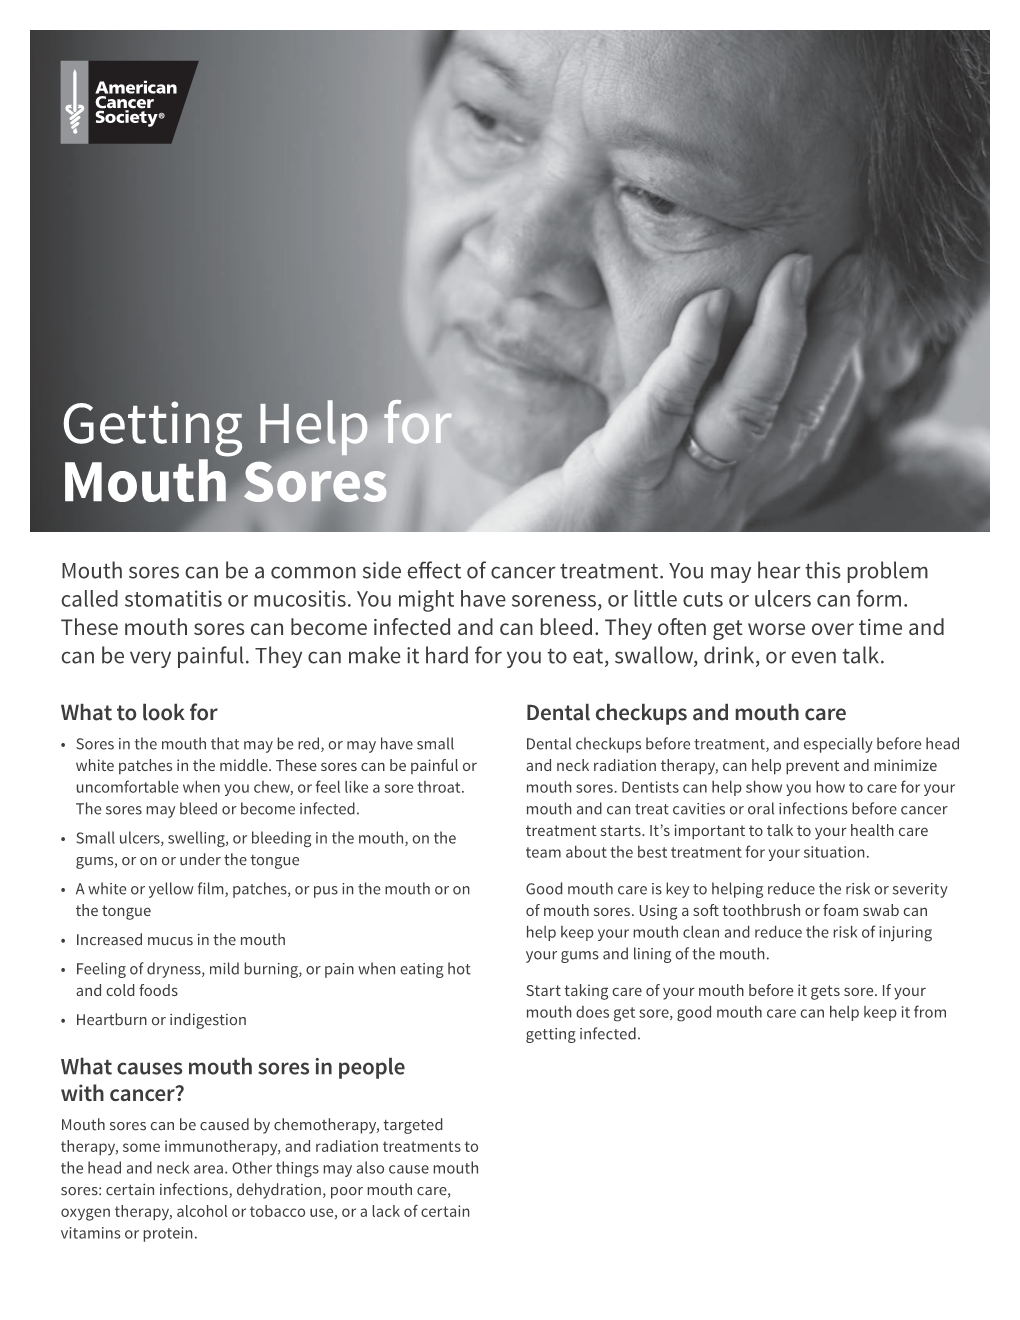 Getting Help for Mouth Sores